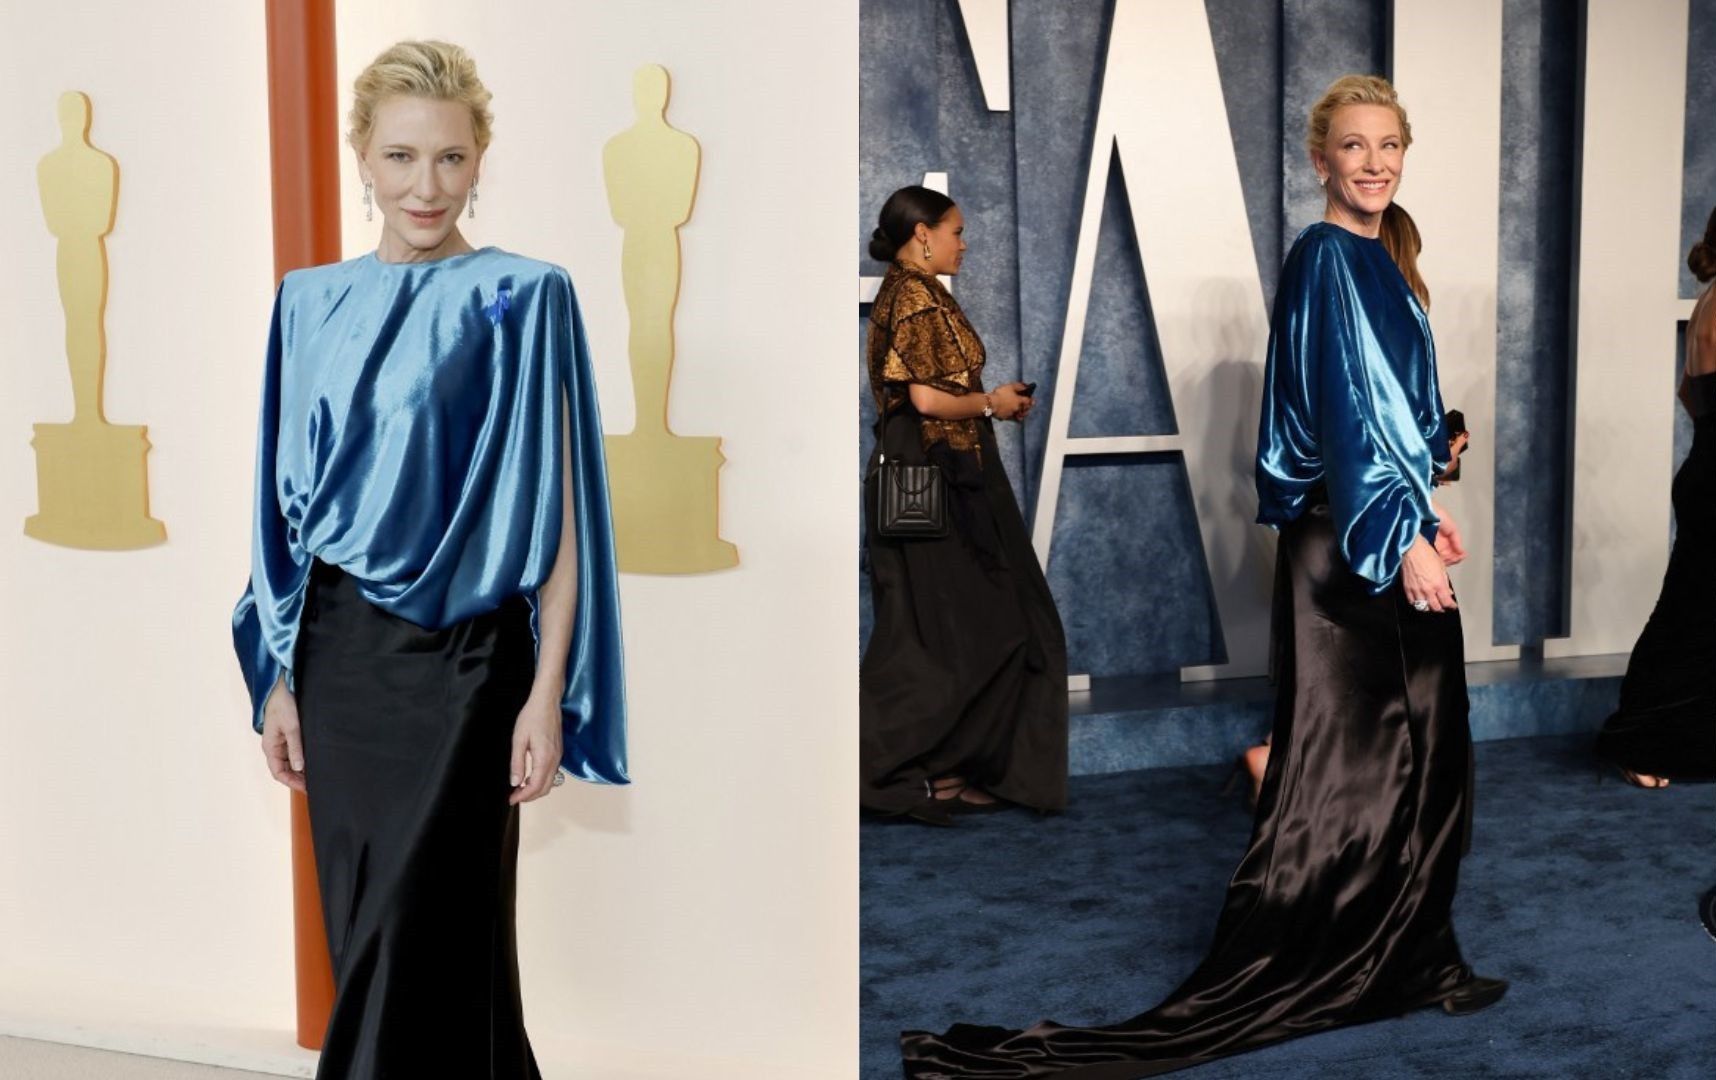 Cate Blanchett trending for not changing clothes from Oscars to Vanity Fair after-party